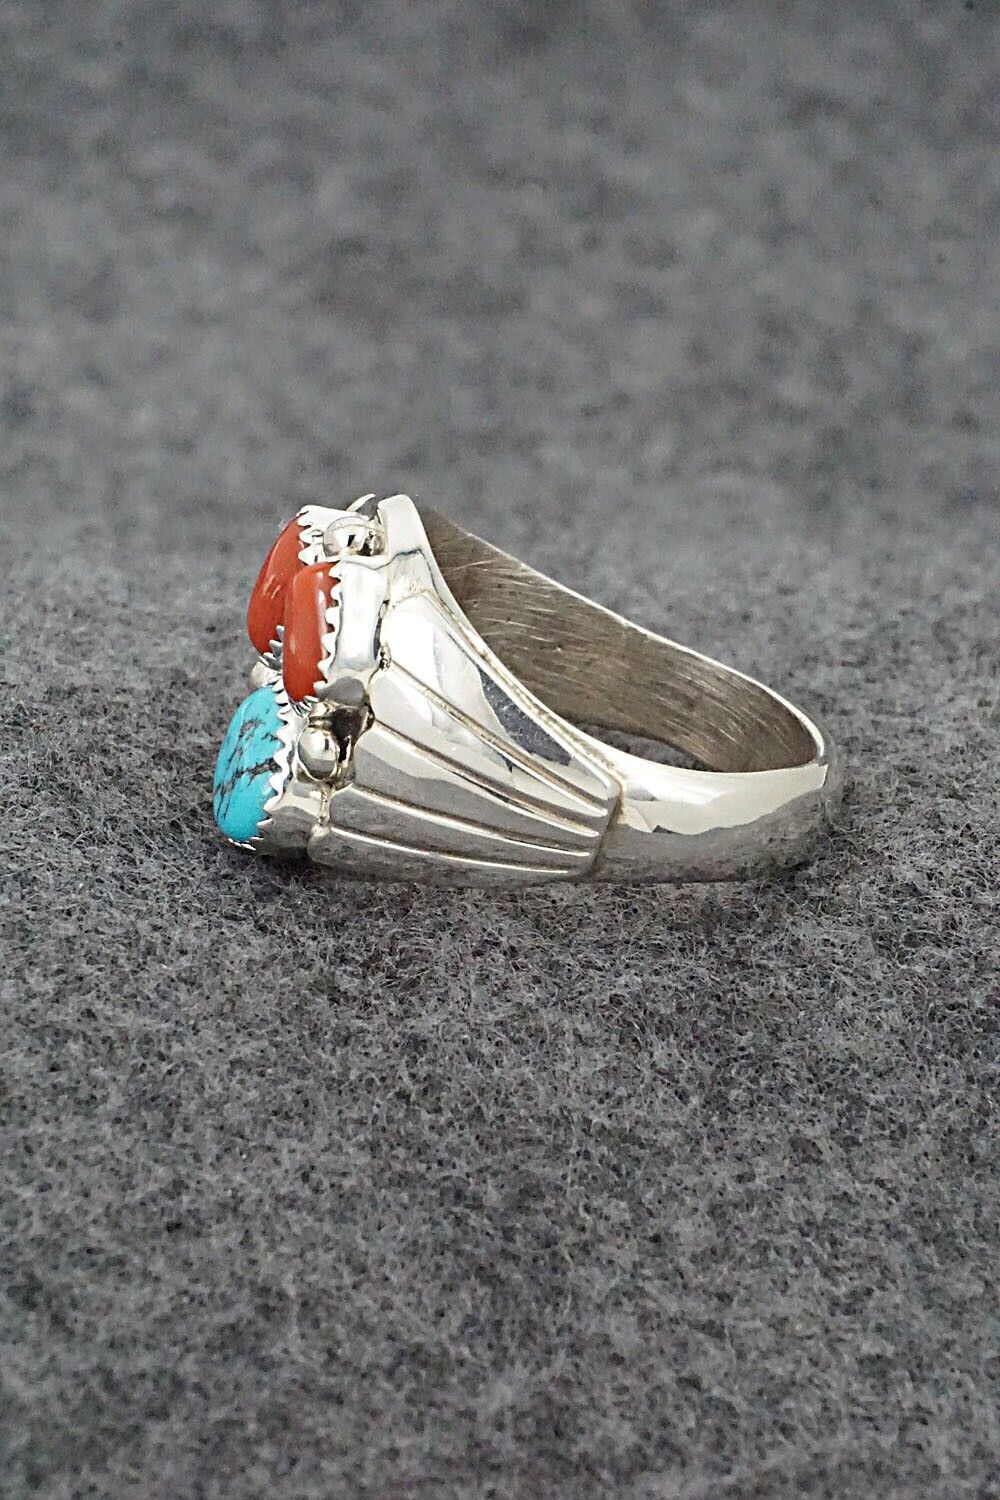 Turquoise, Coral and Sterling Silver Ring - Annie Spencer - Size 13.5